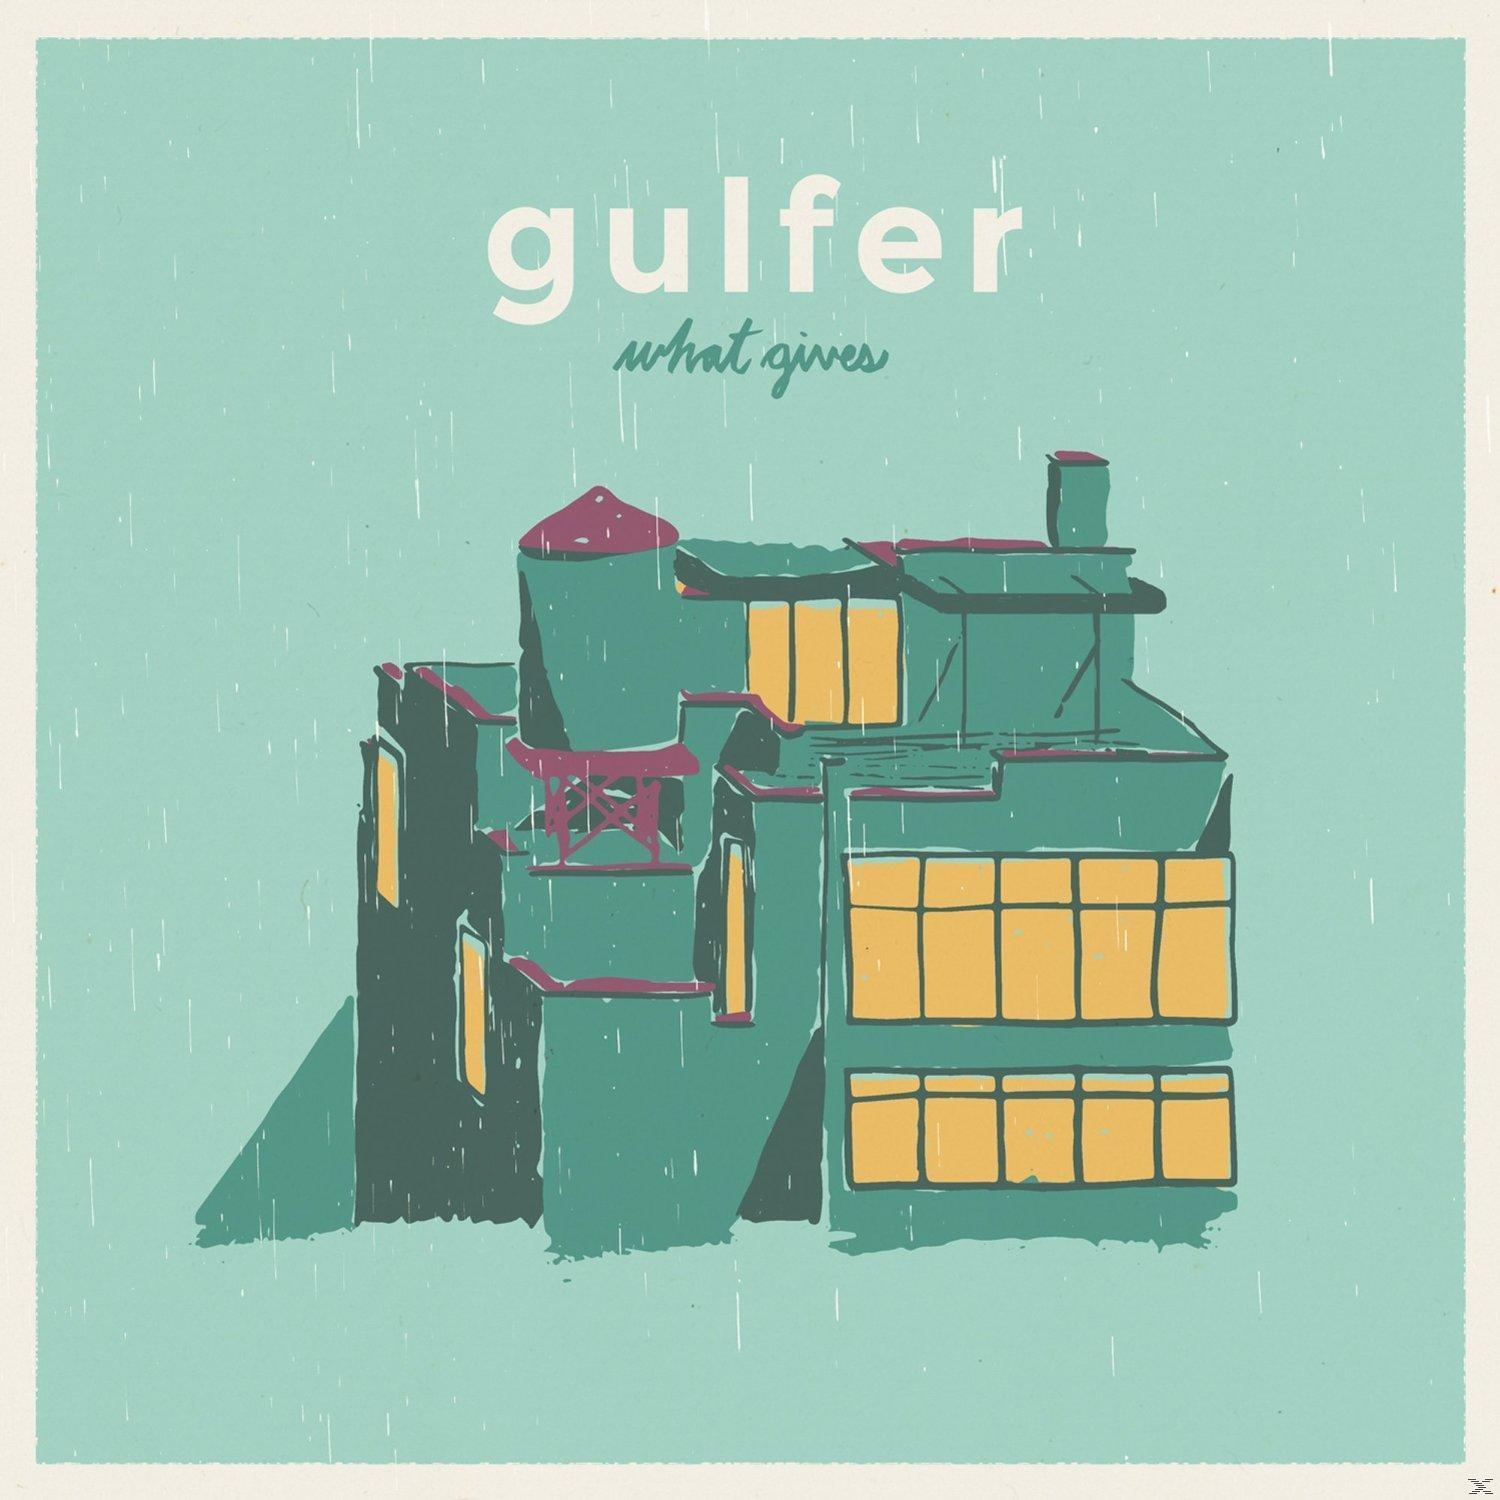 Gulfer - What Gives (EP) (Vinyl) 